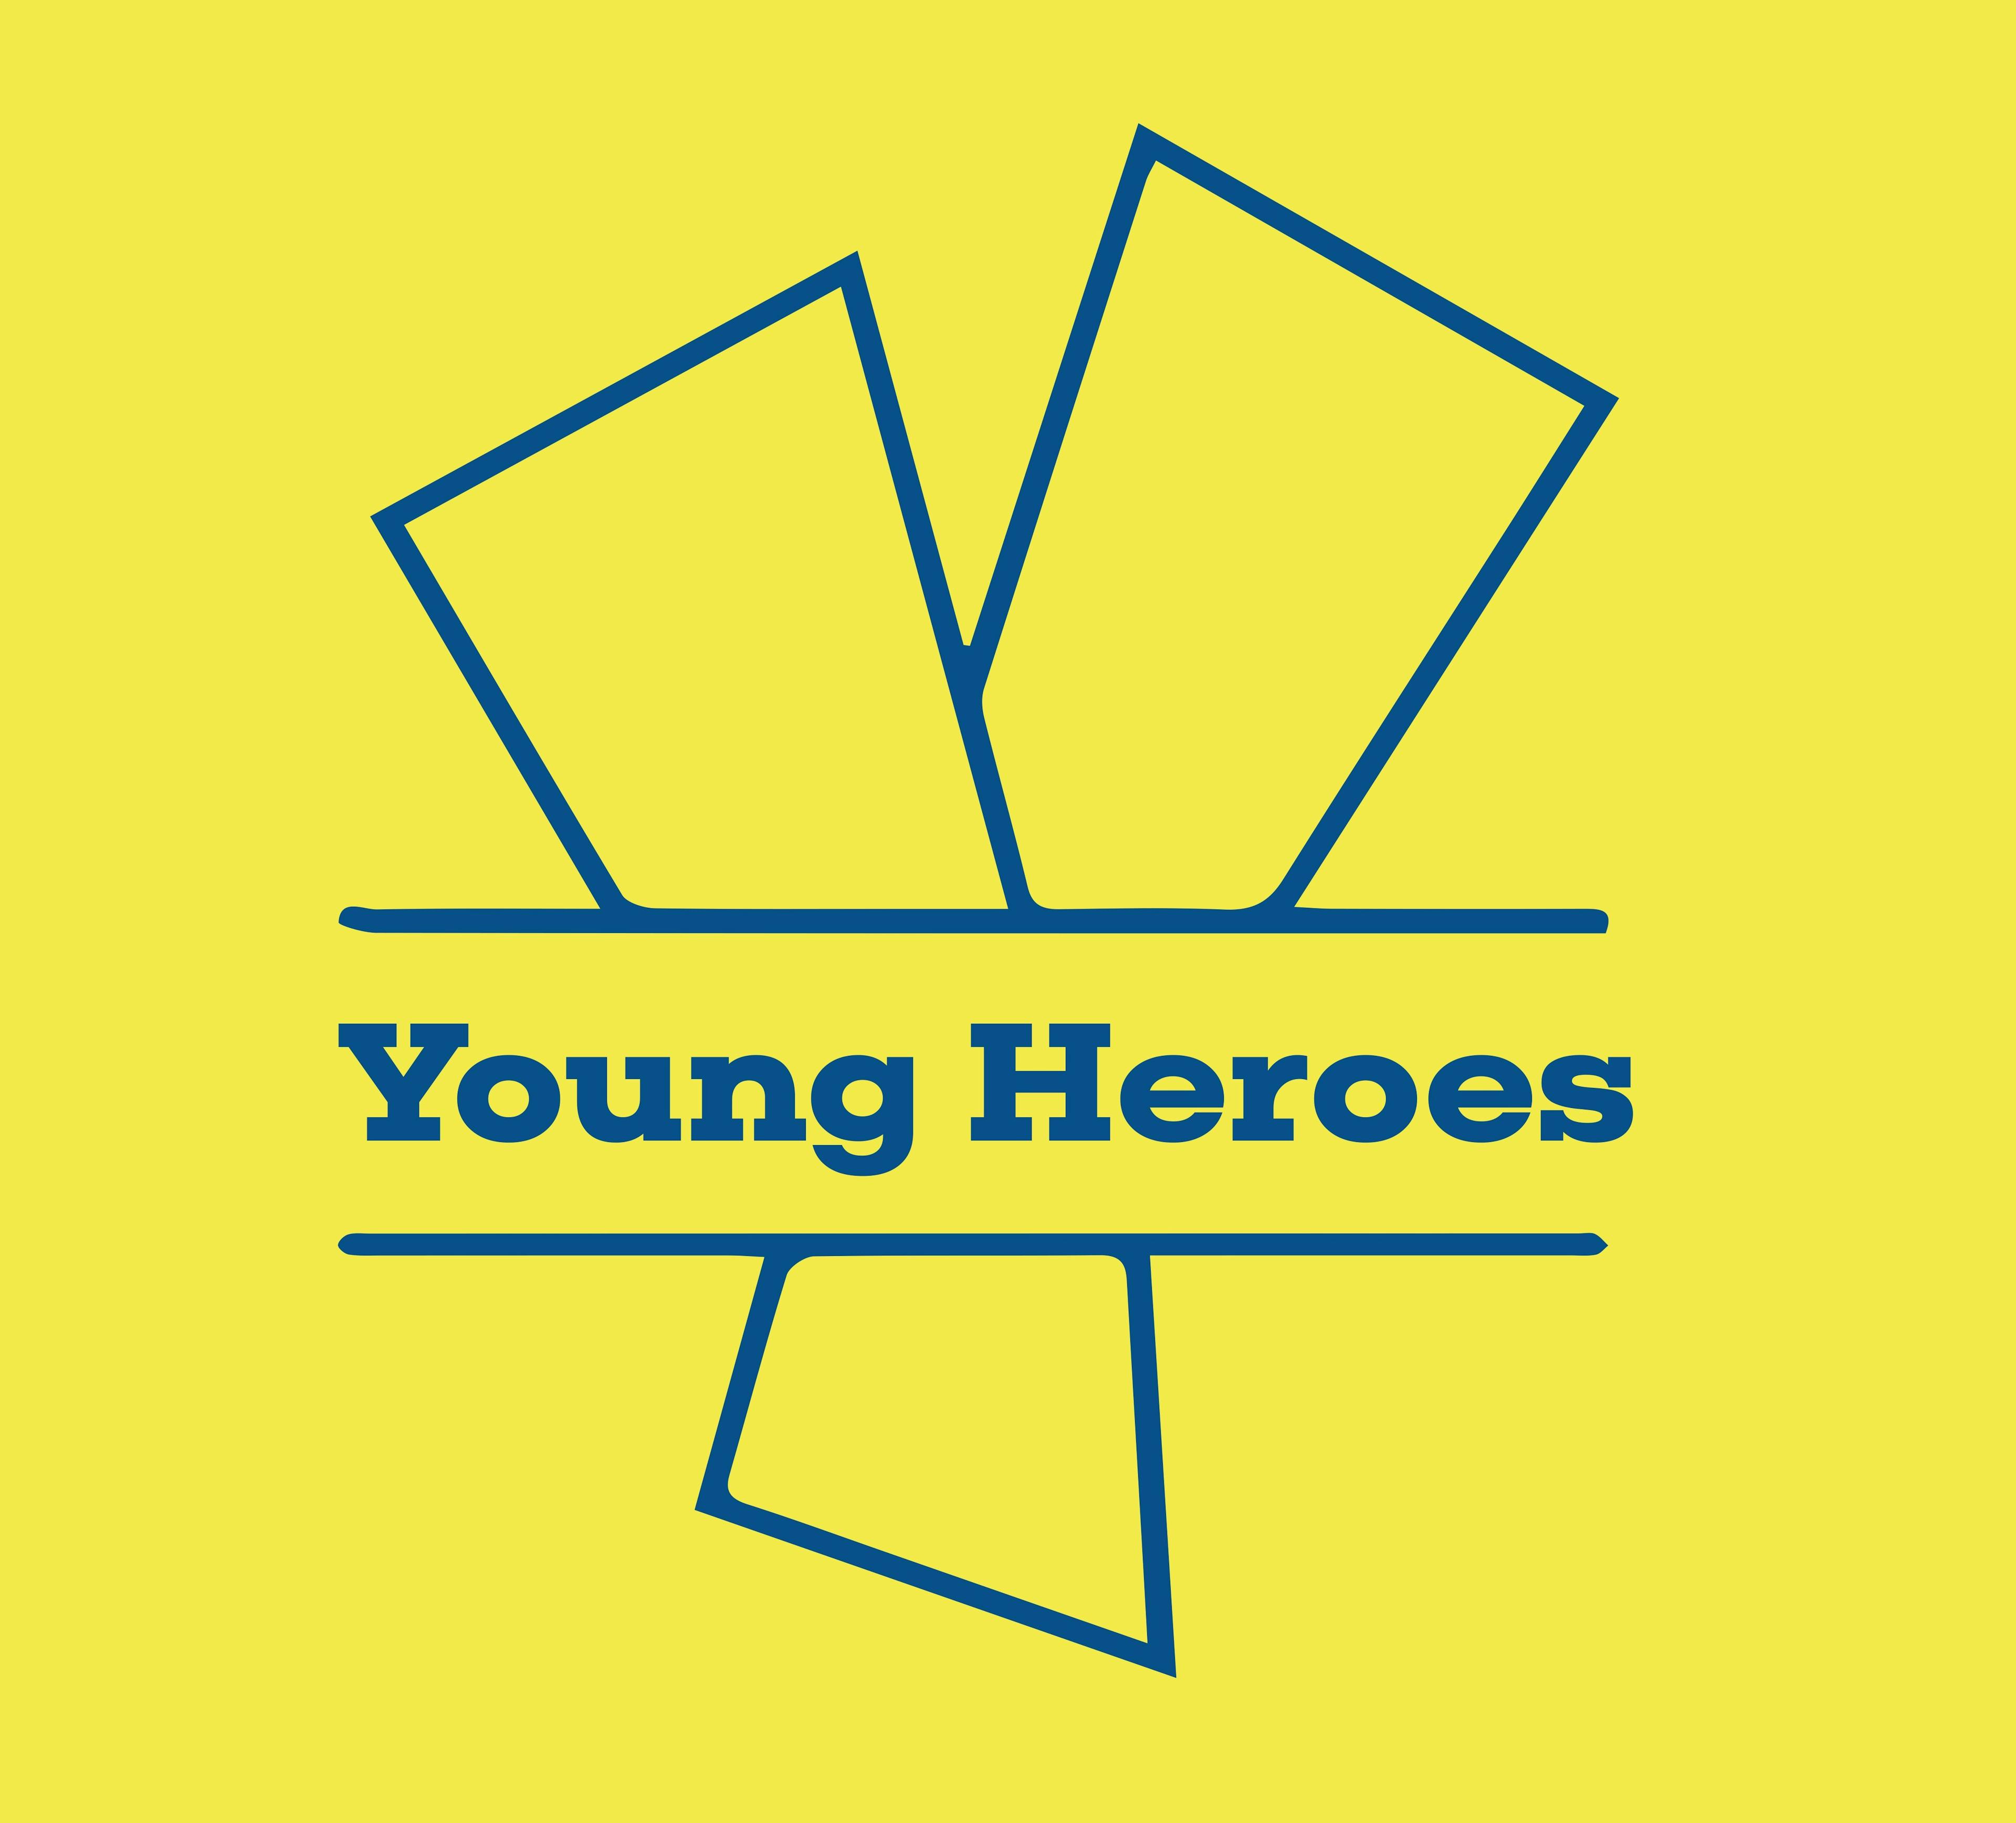 Young heroes